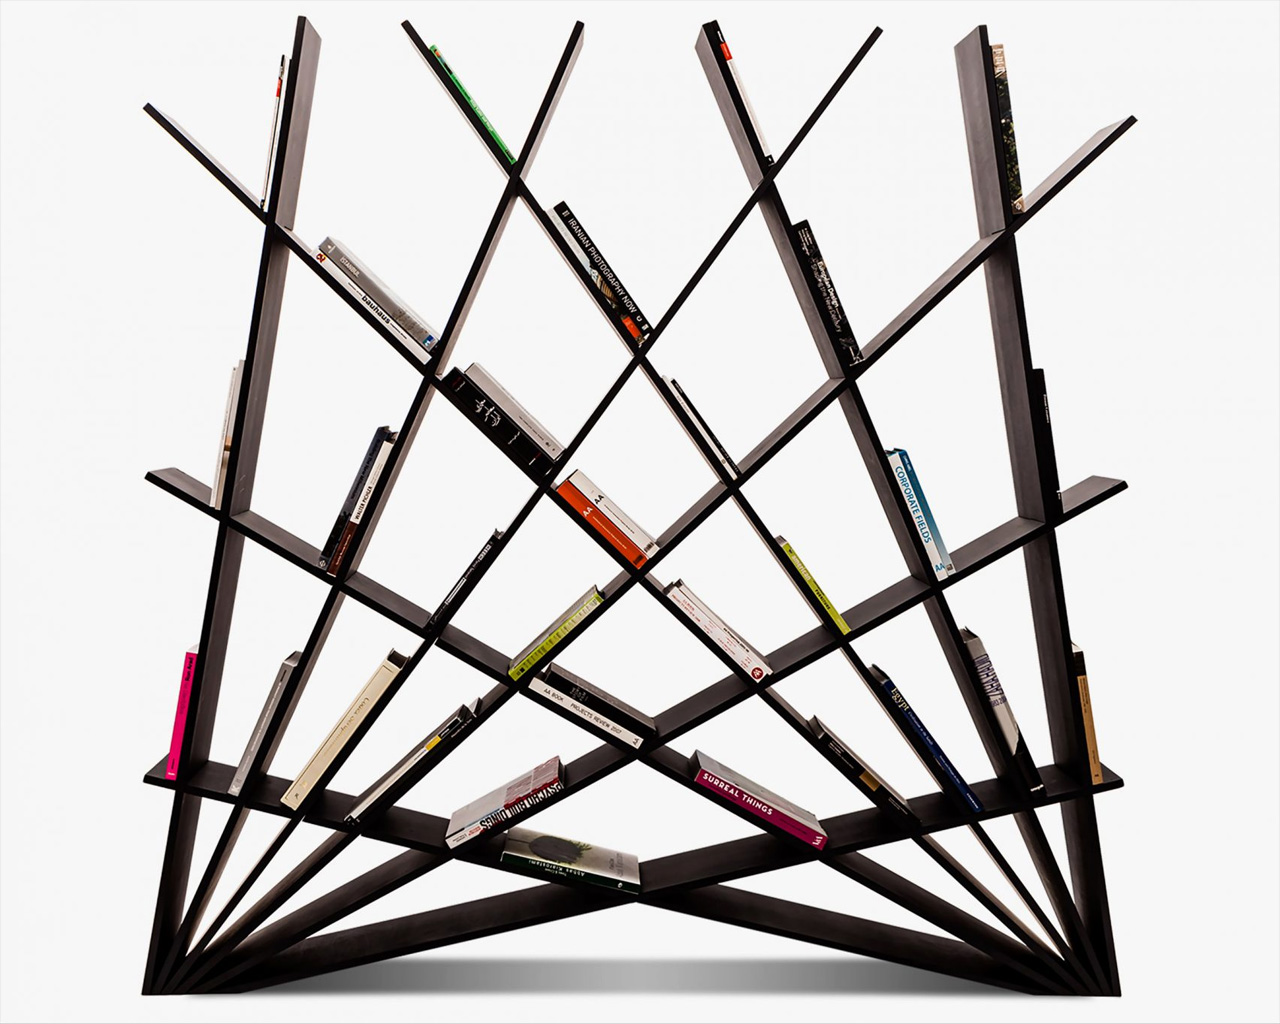 This geometrically fascinating bookshelf is the ultimate storage space for your prized books